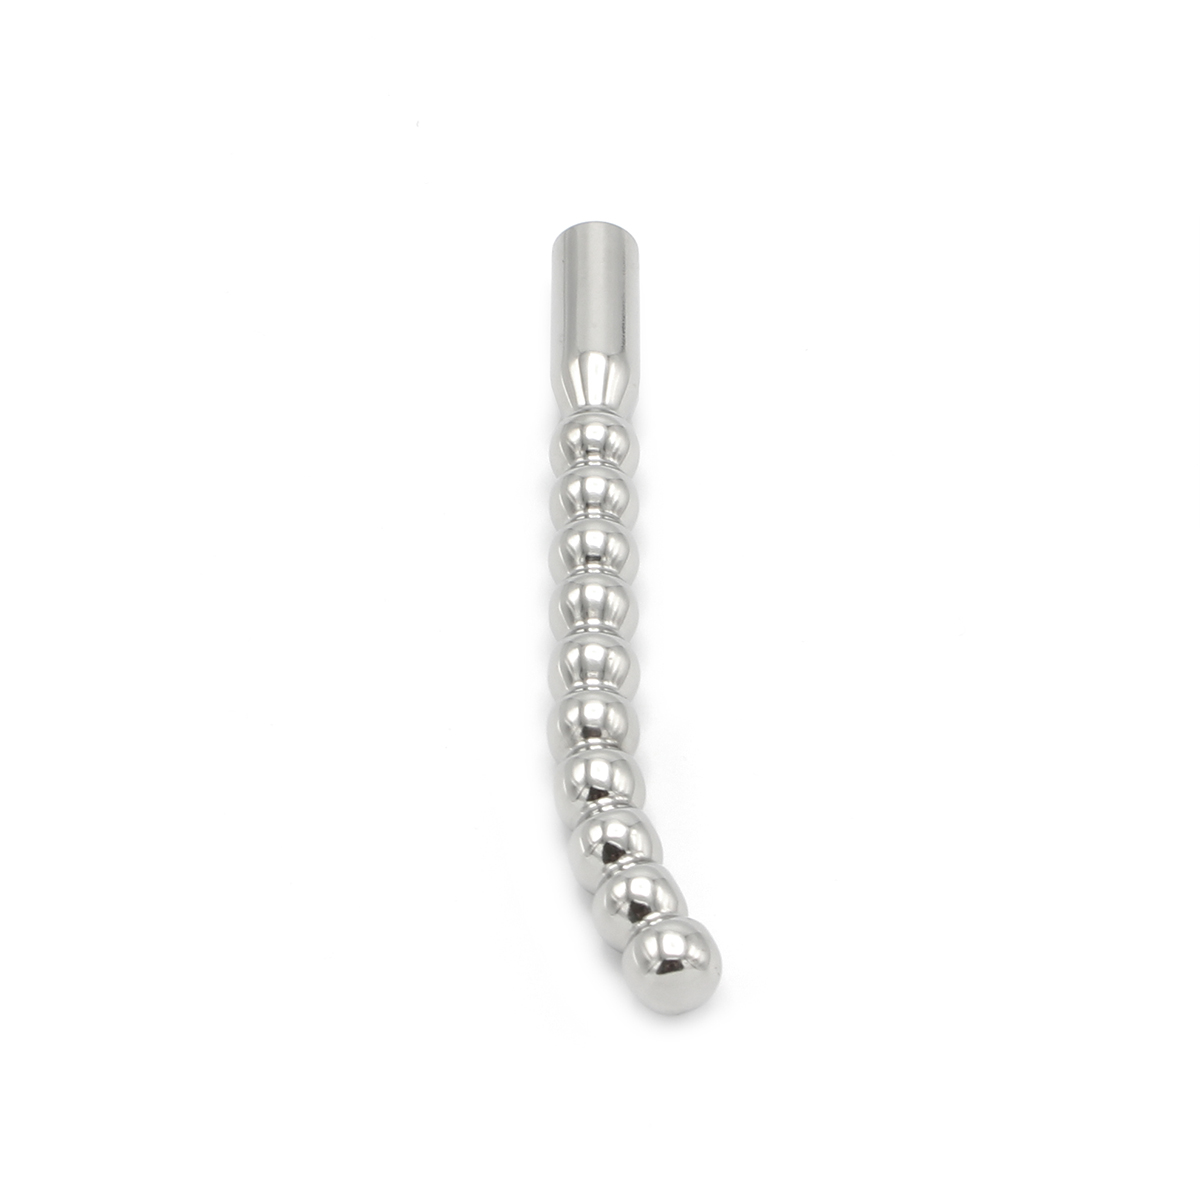 Solid-Penis-Plug-Beaded-Curved-10-mm-OPR-2960101-2